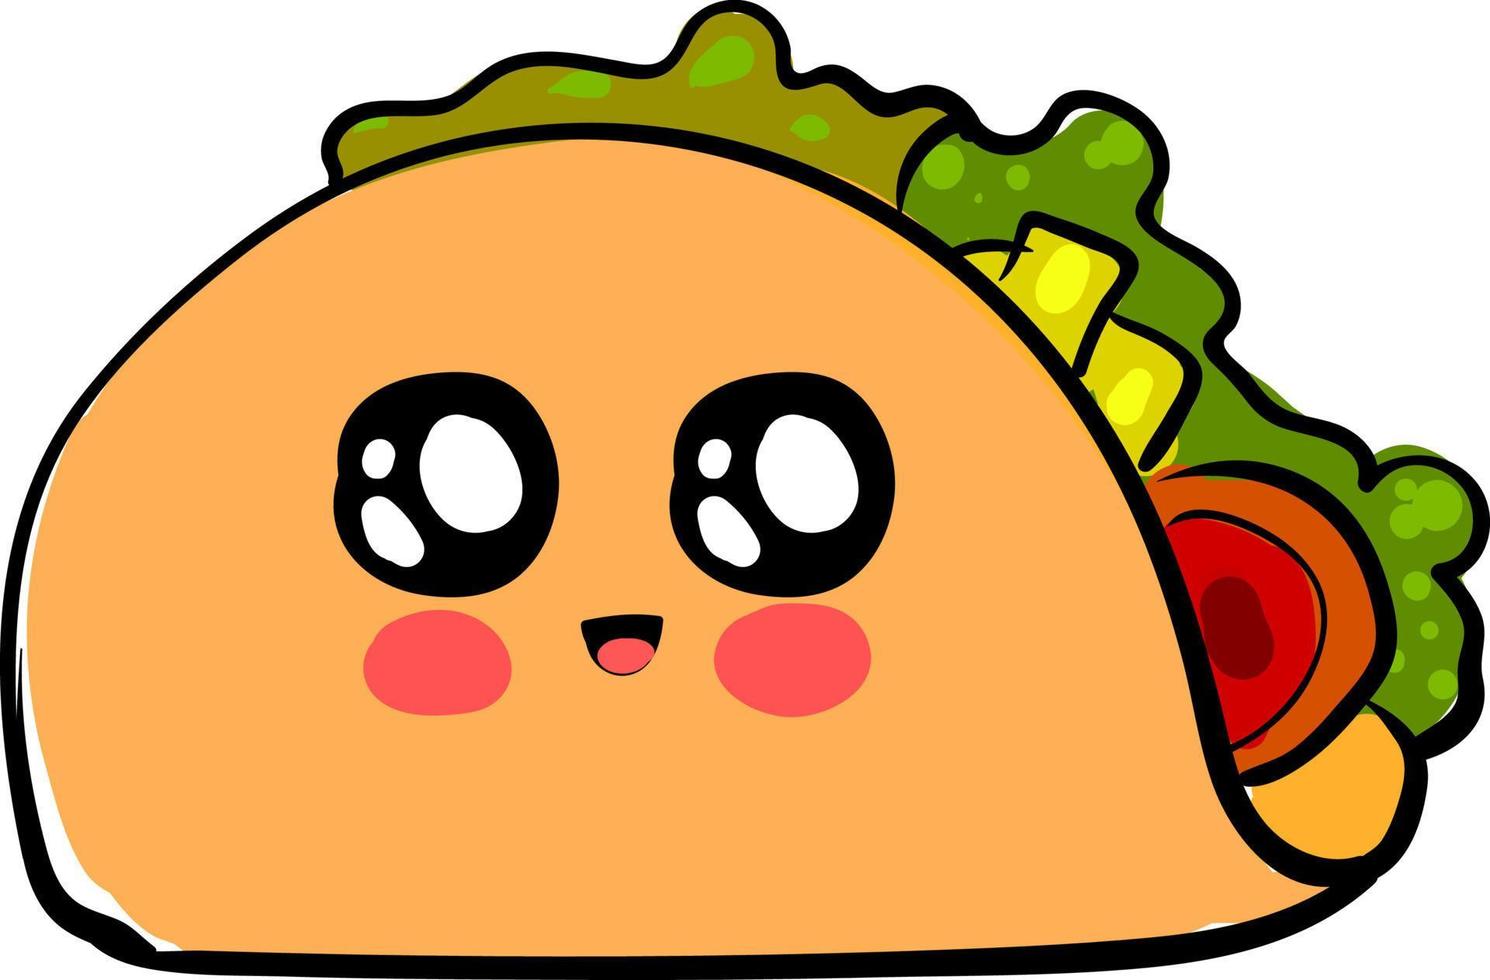 Cute taco, illustration, vector on white background.